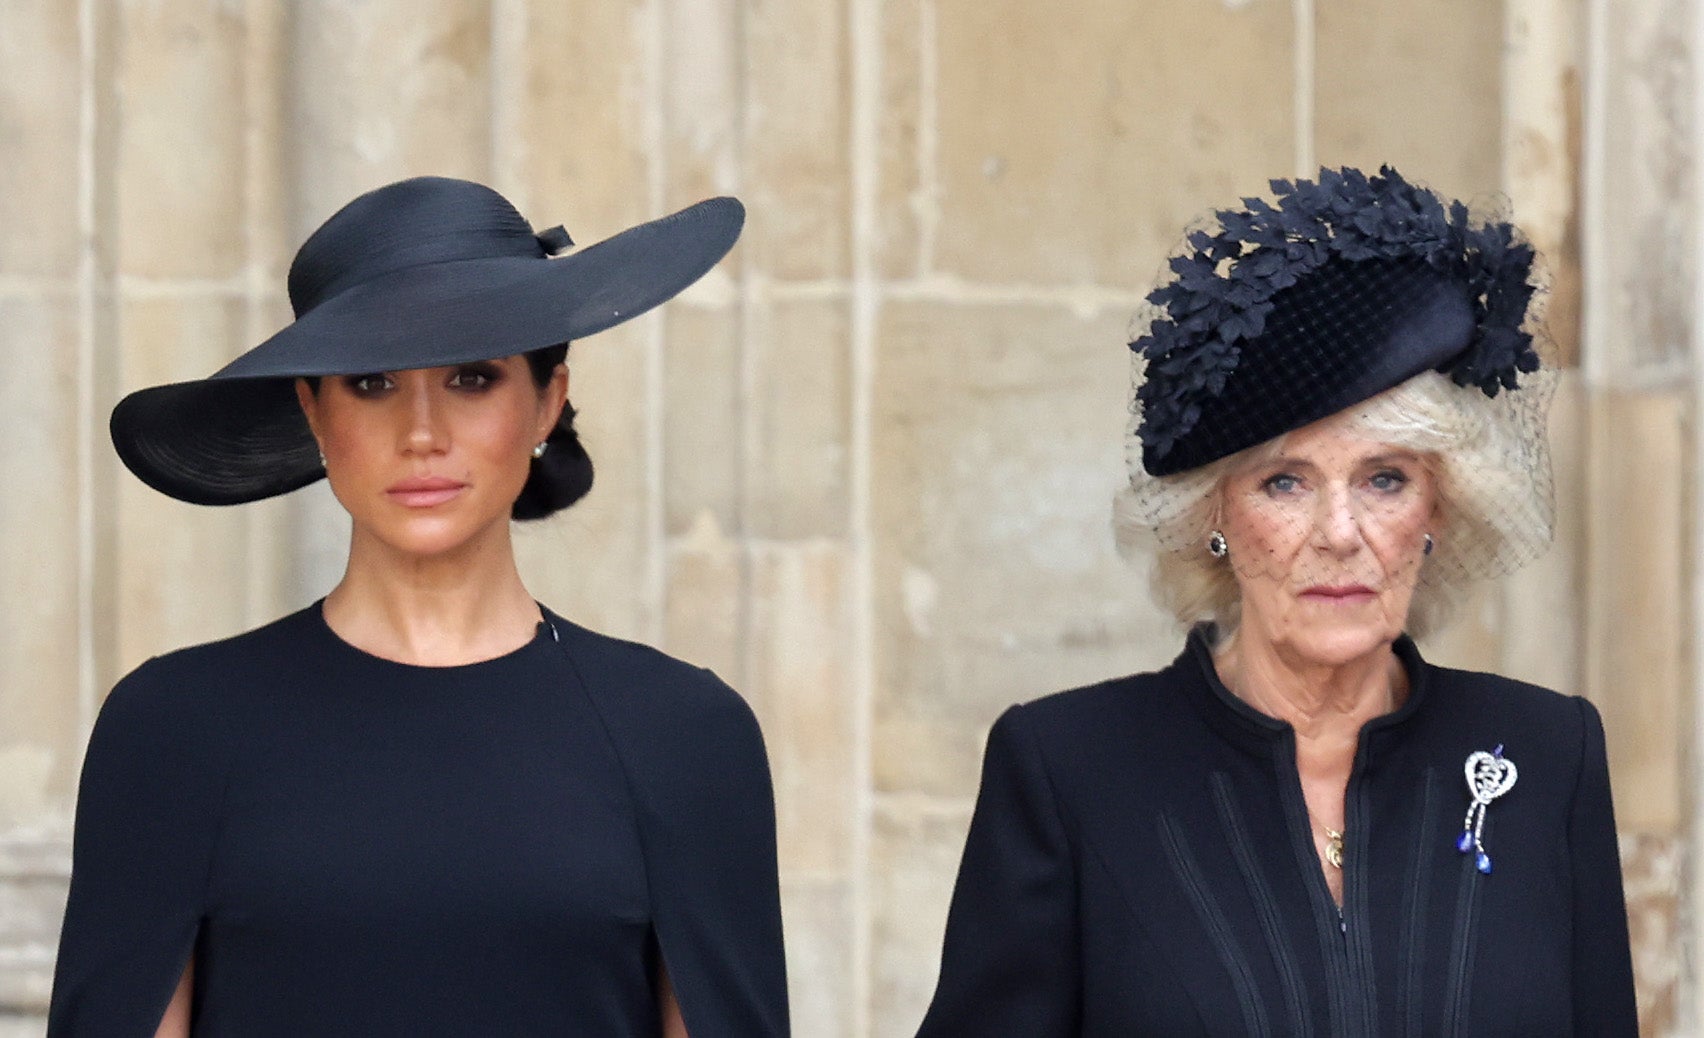 Meghan Markle and Camilla, Queen Consort